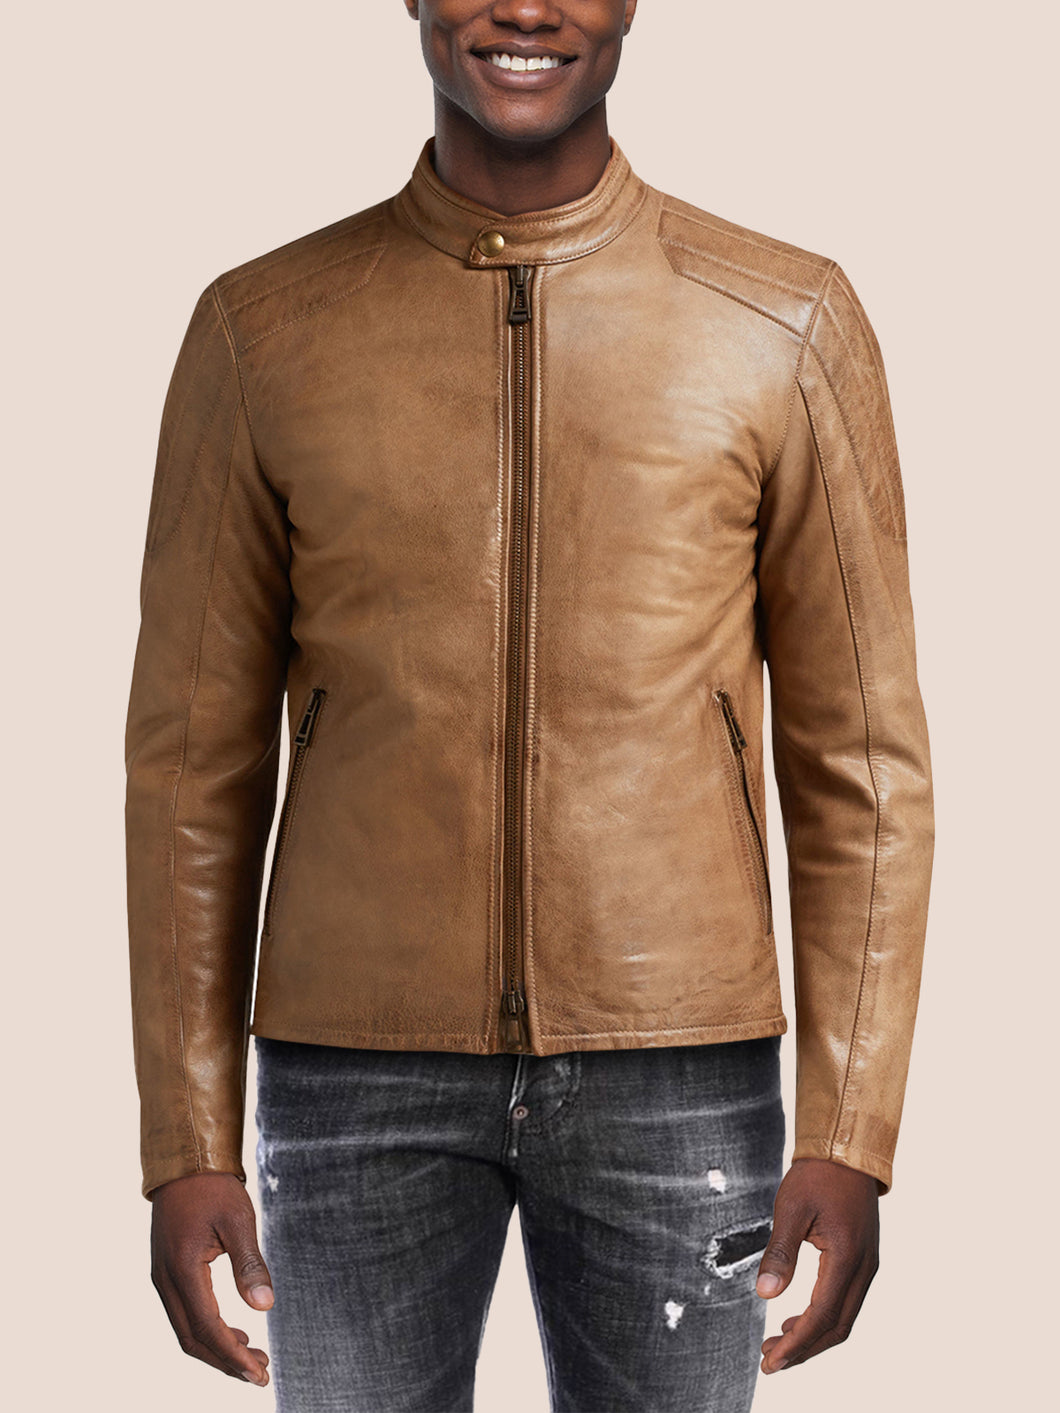 Men's Light Brown Hand Waxed Leather Jacket